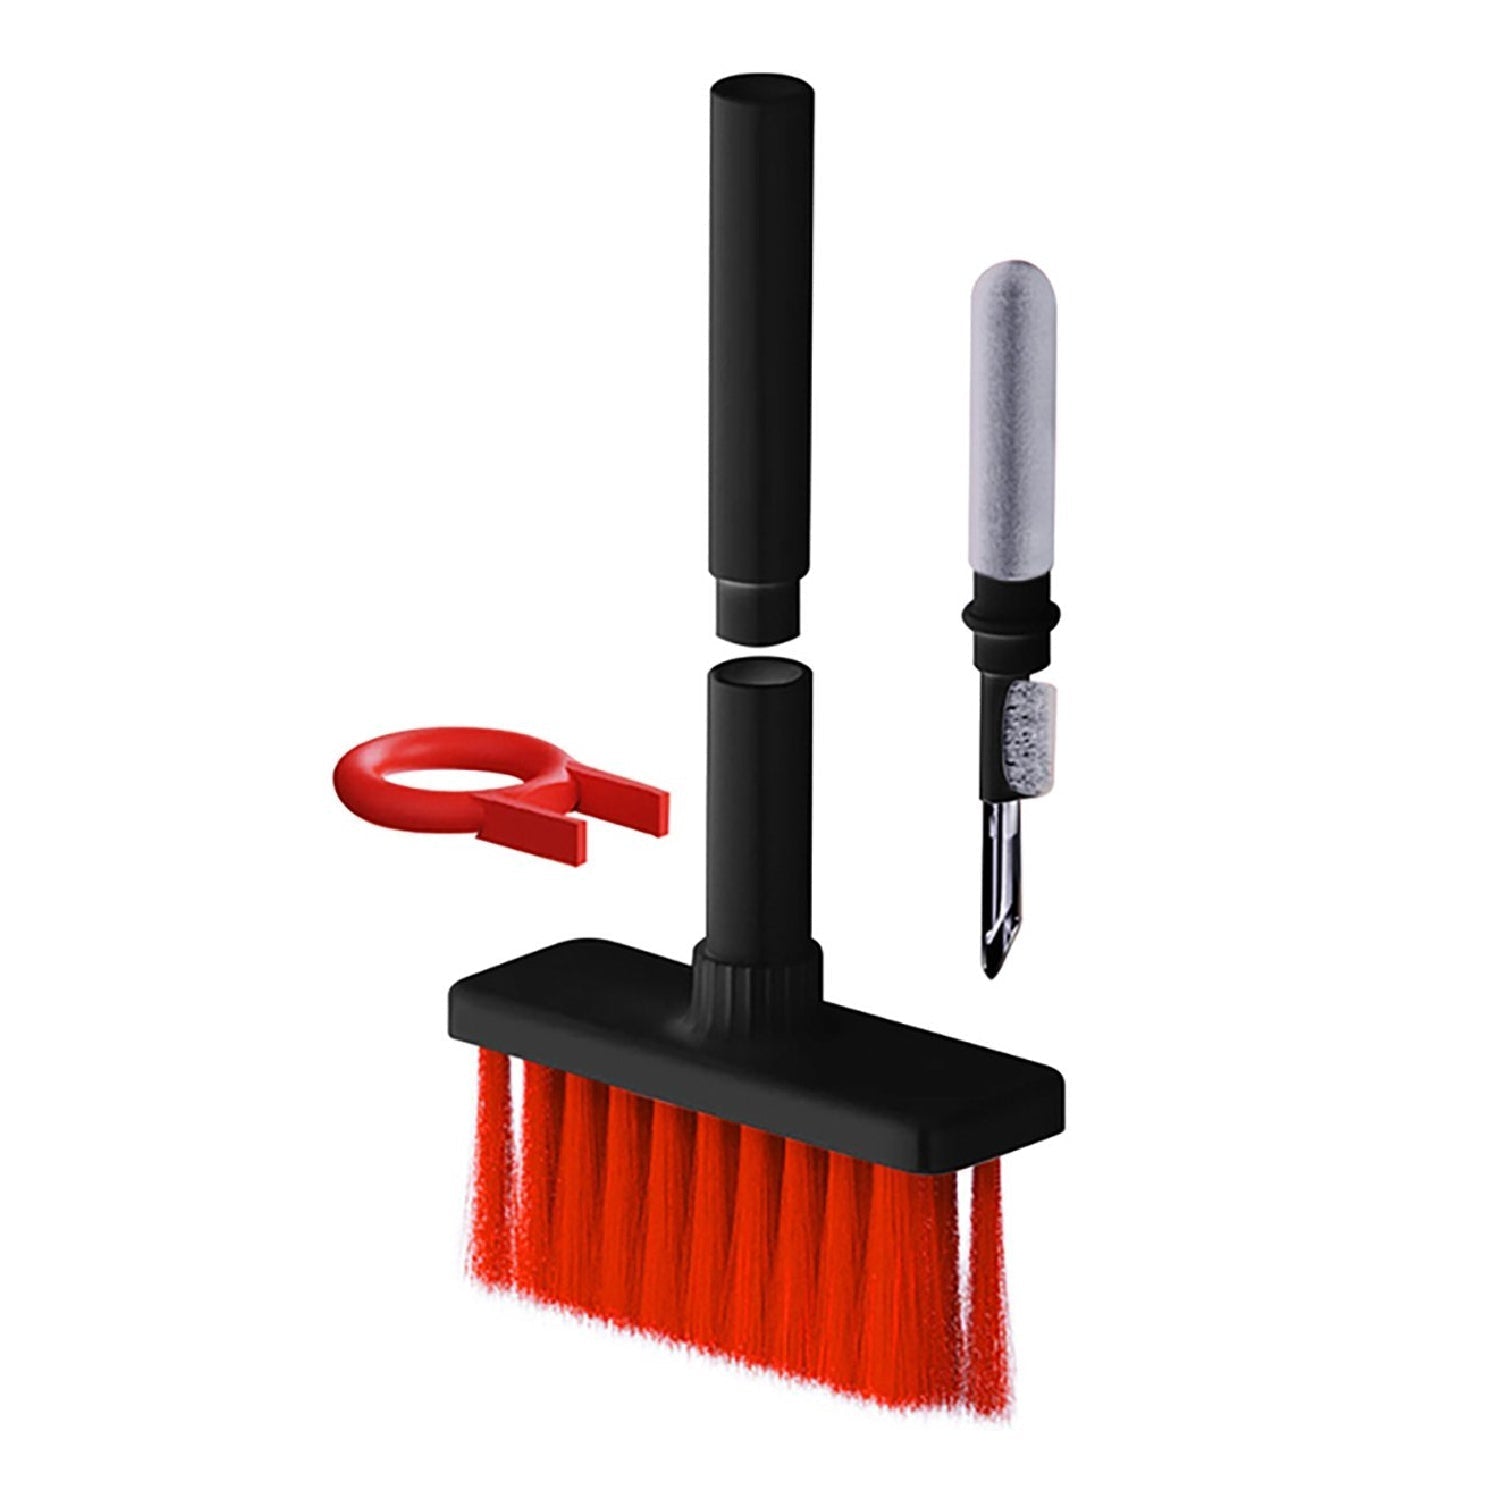 6251 5in1 Multi-Function Soft Dust Clean Bush for Computer Cleaning, with Corner Gap Duster Keycap Puller Remover for Gamer Pc 